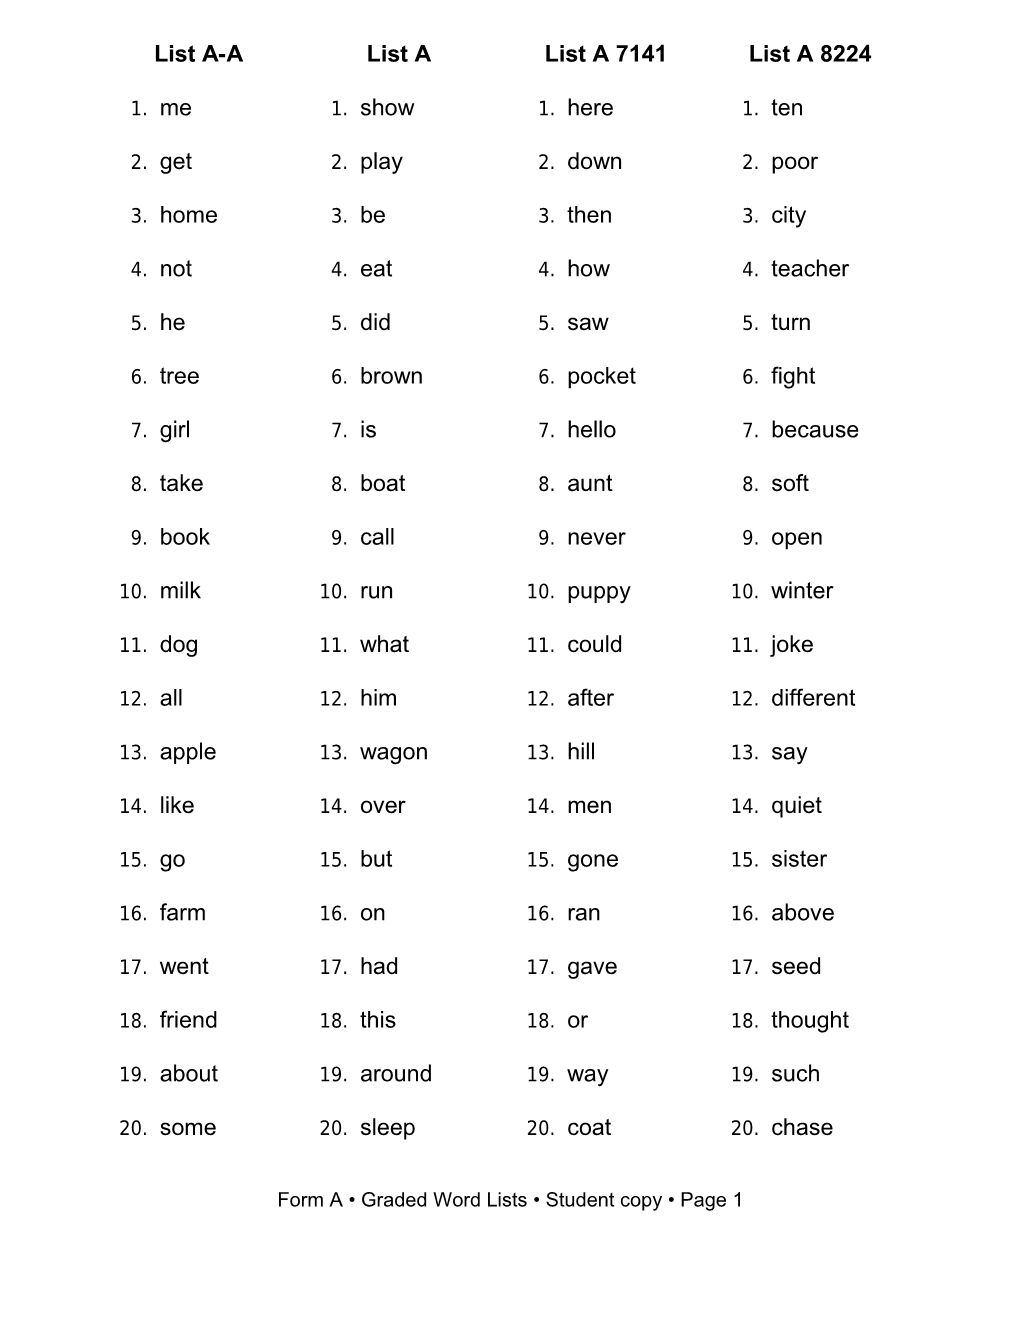 Form a Graded Word Lists Student Copy Page 1